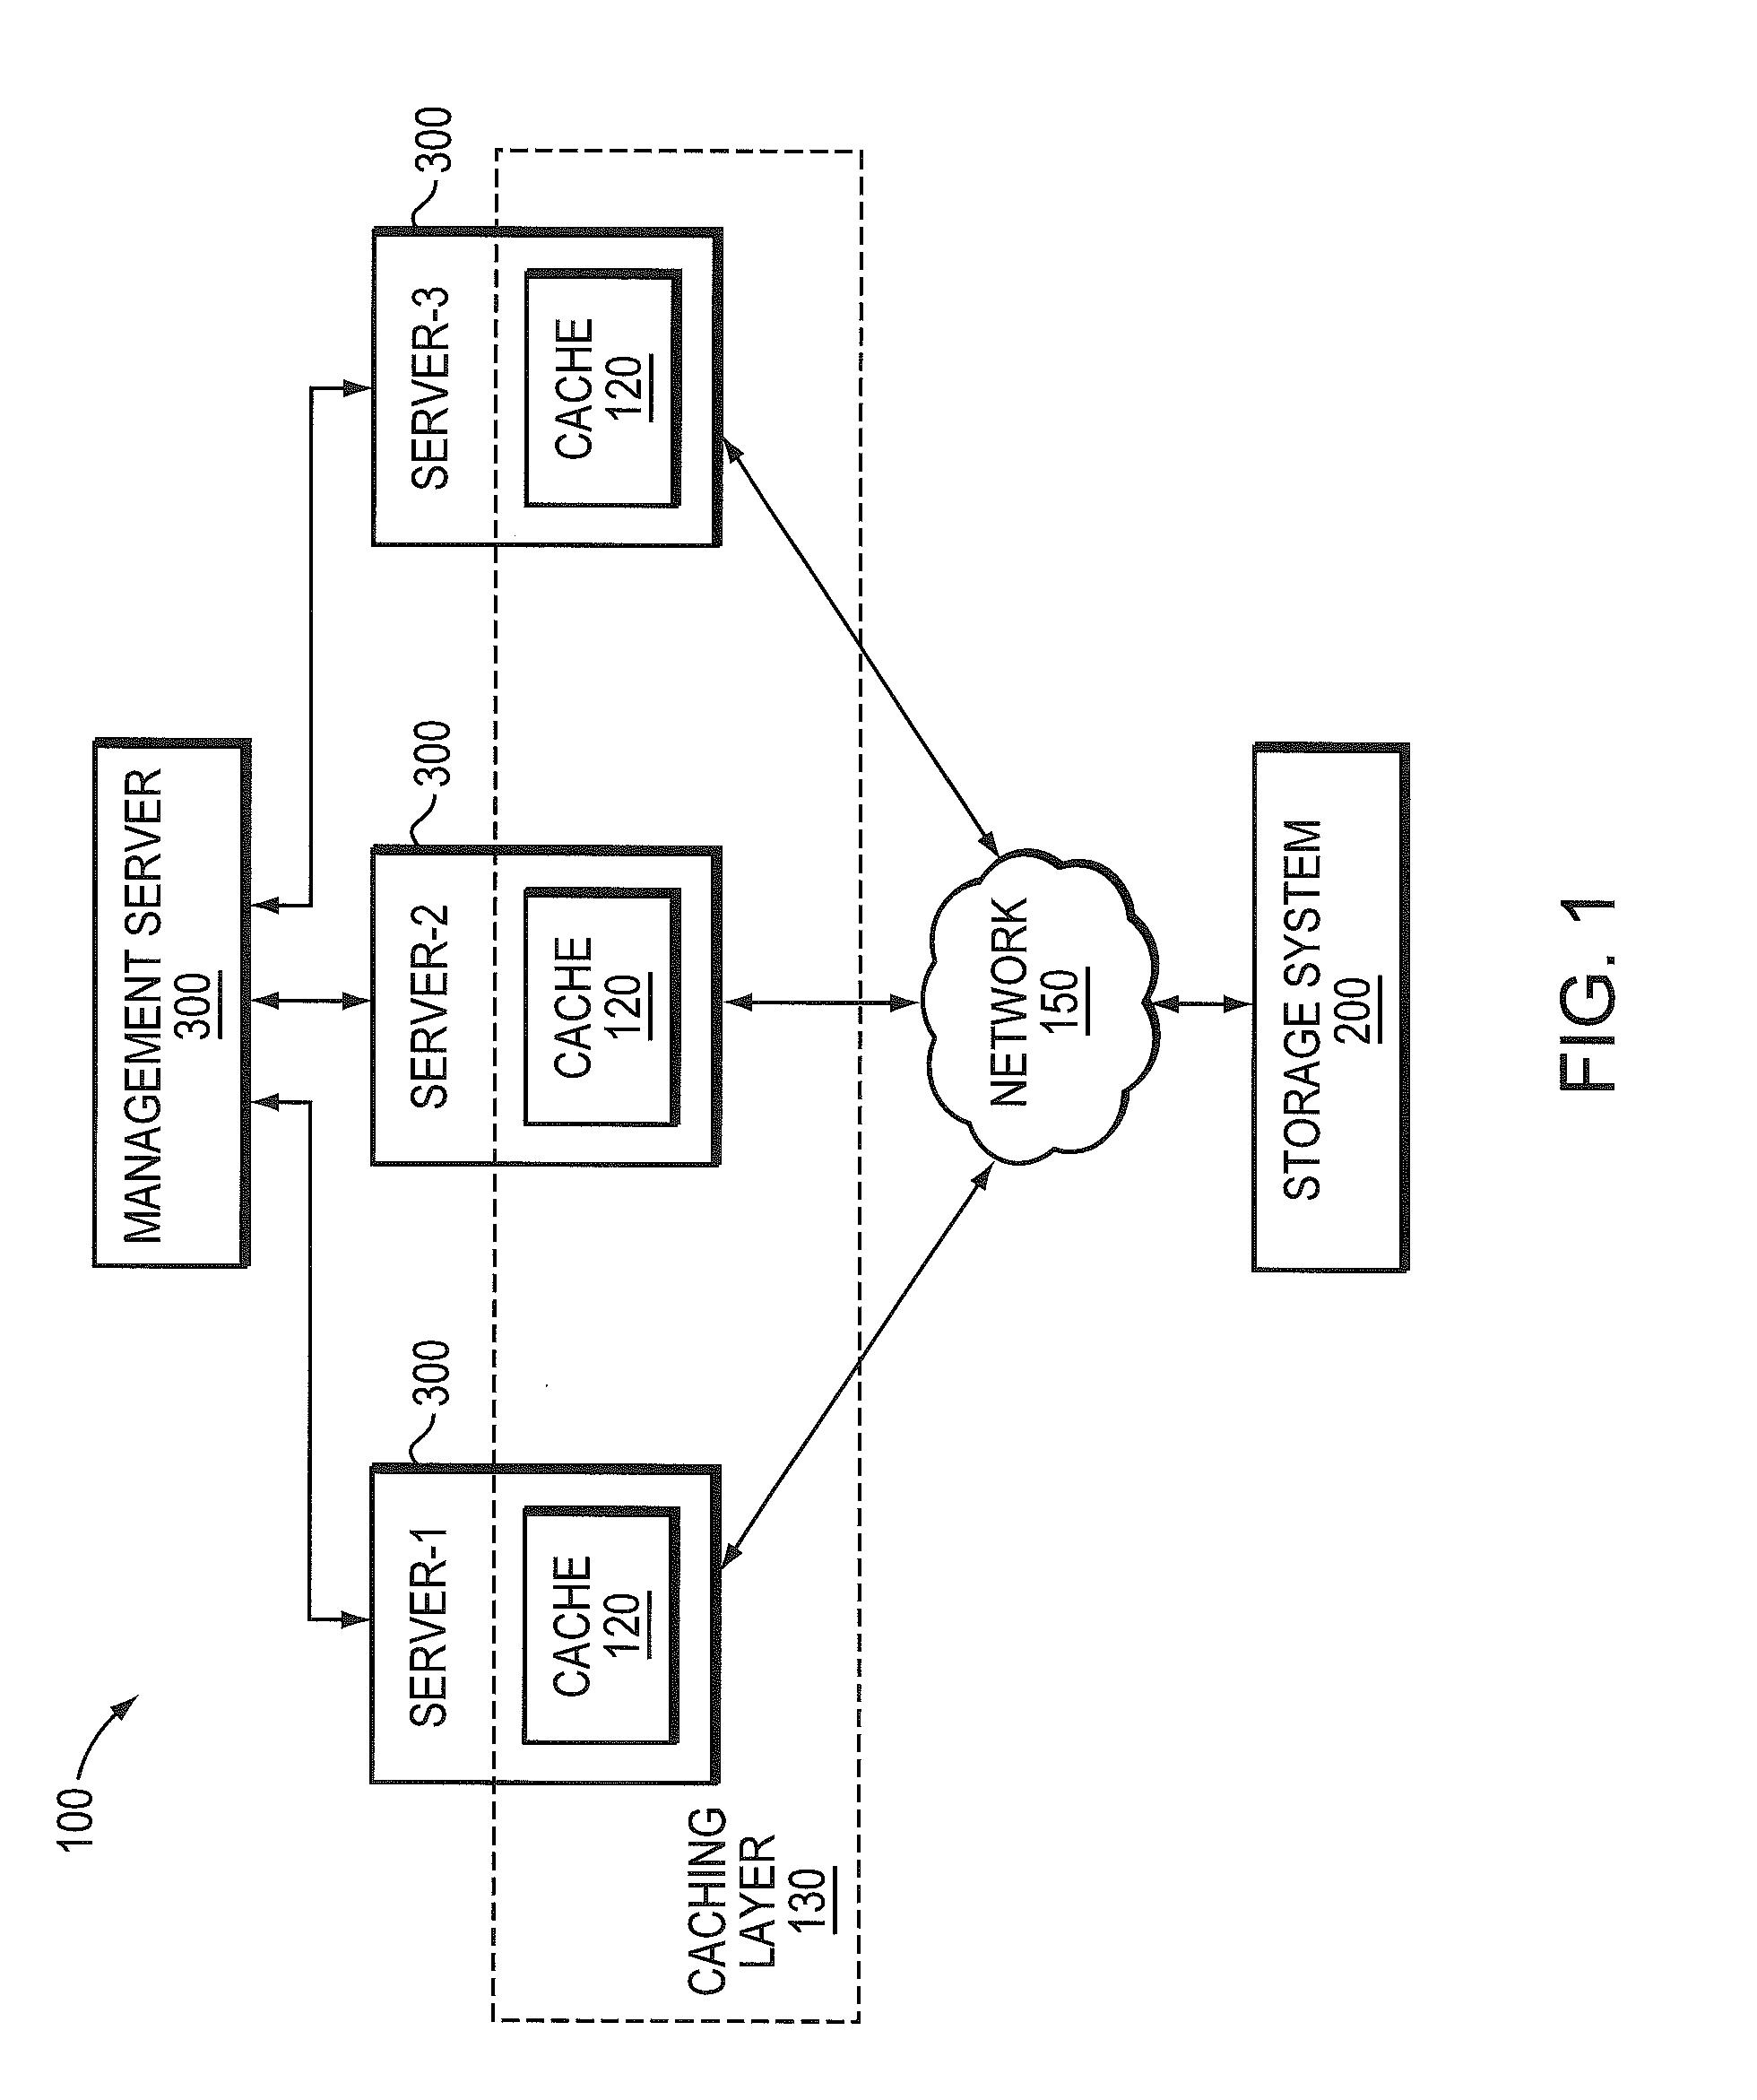 Dynamic caching technique for adaptively controlling data block copies in a distributed data processing system